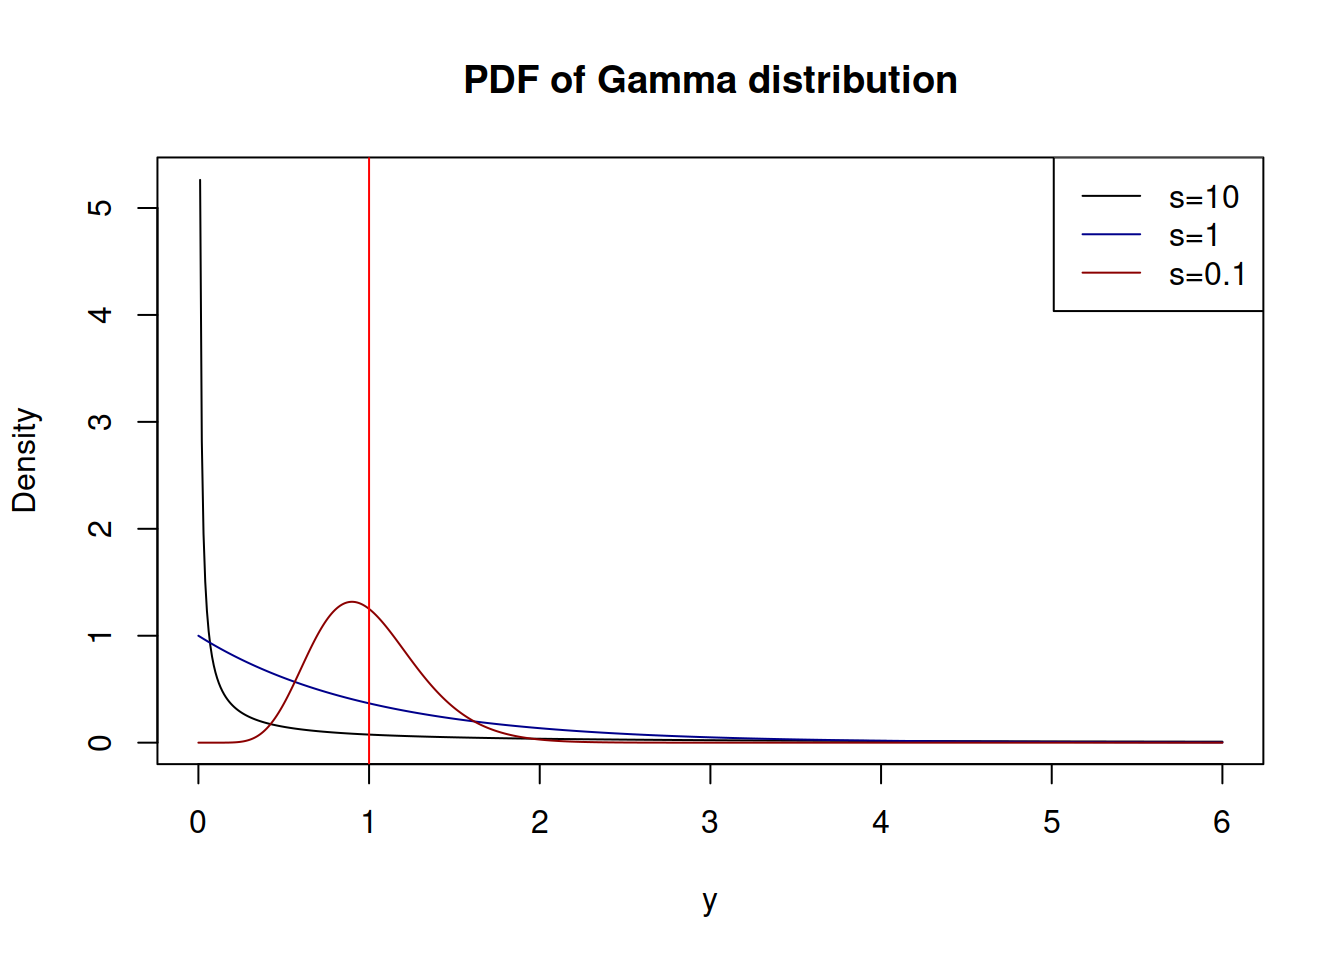 Probability Density Functions of Gamma distribution